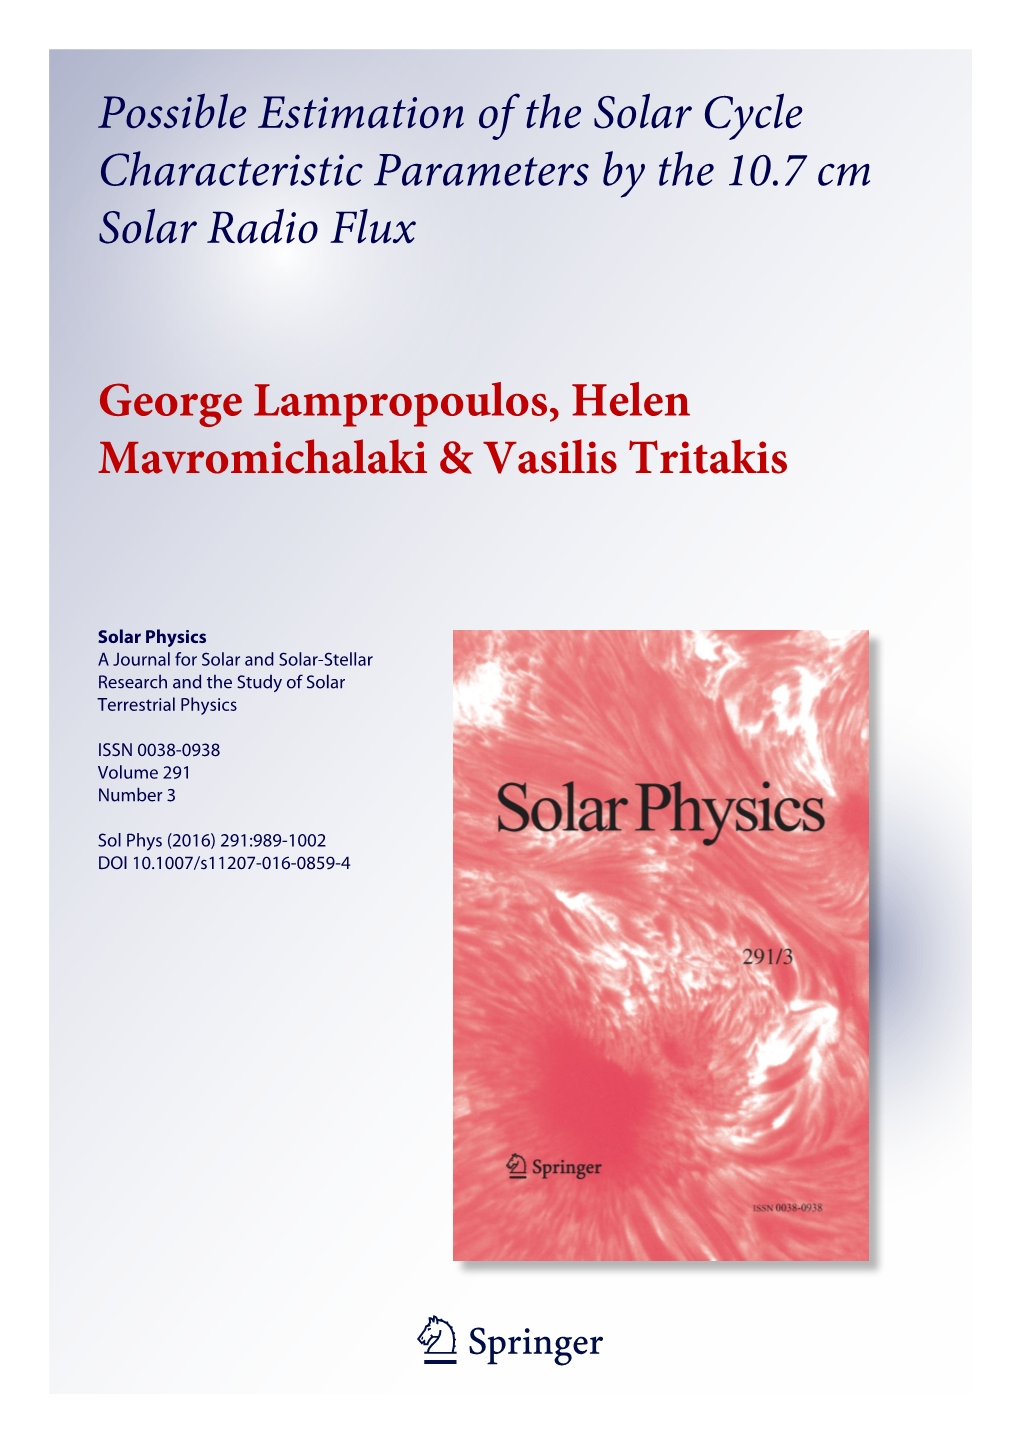 Possible Estimation of the Solar Cycle Characteristic Parameters by the 10.7 Cm Solar Radio Flux